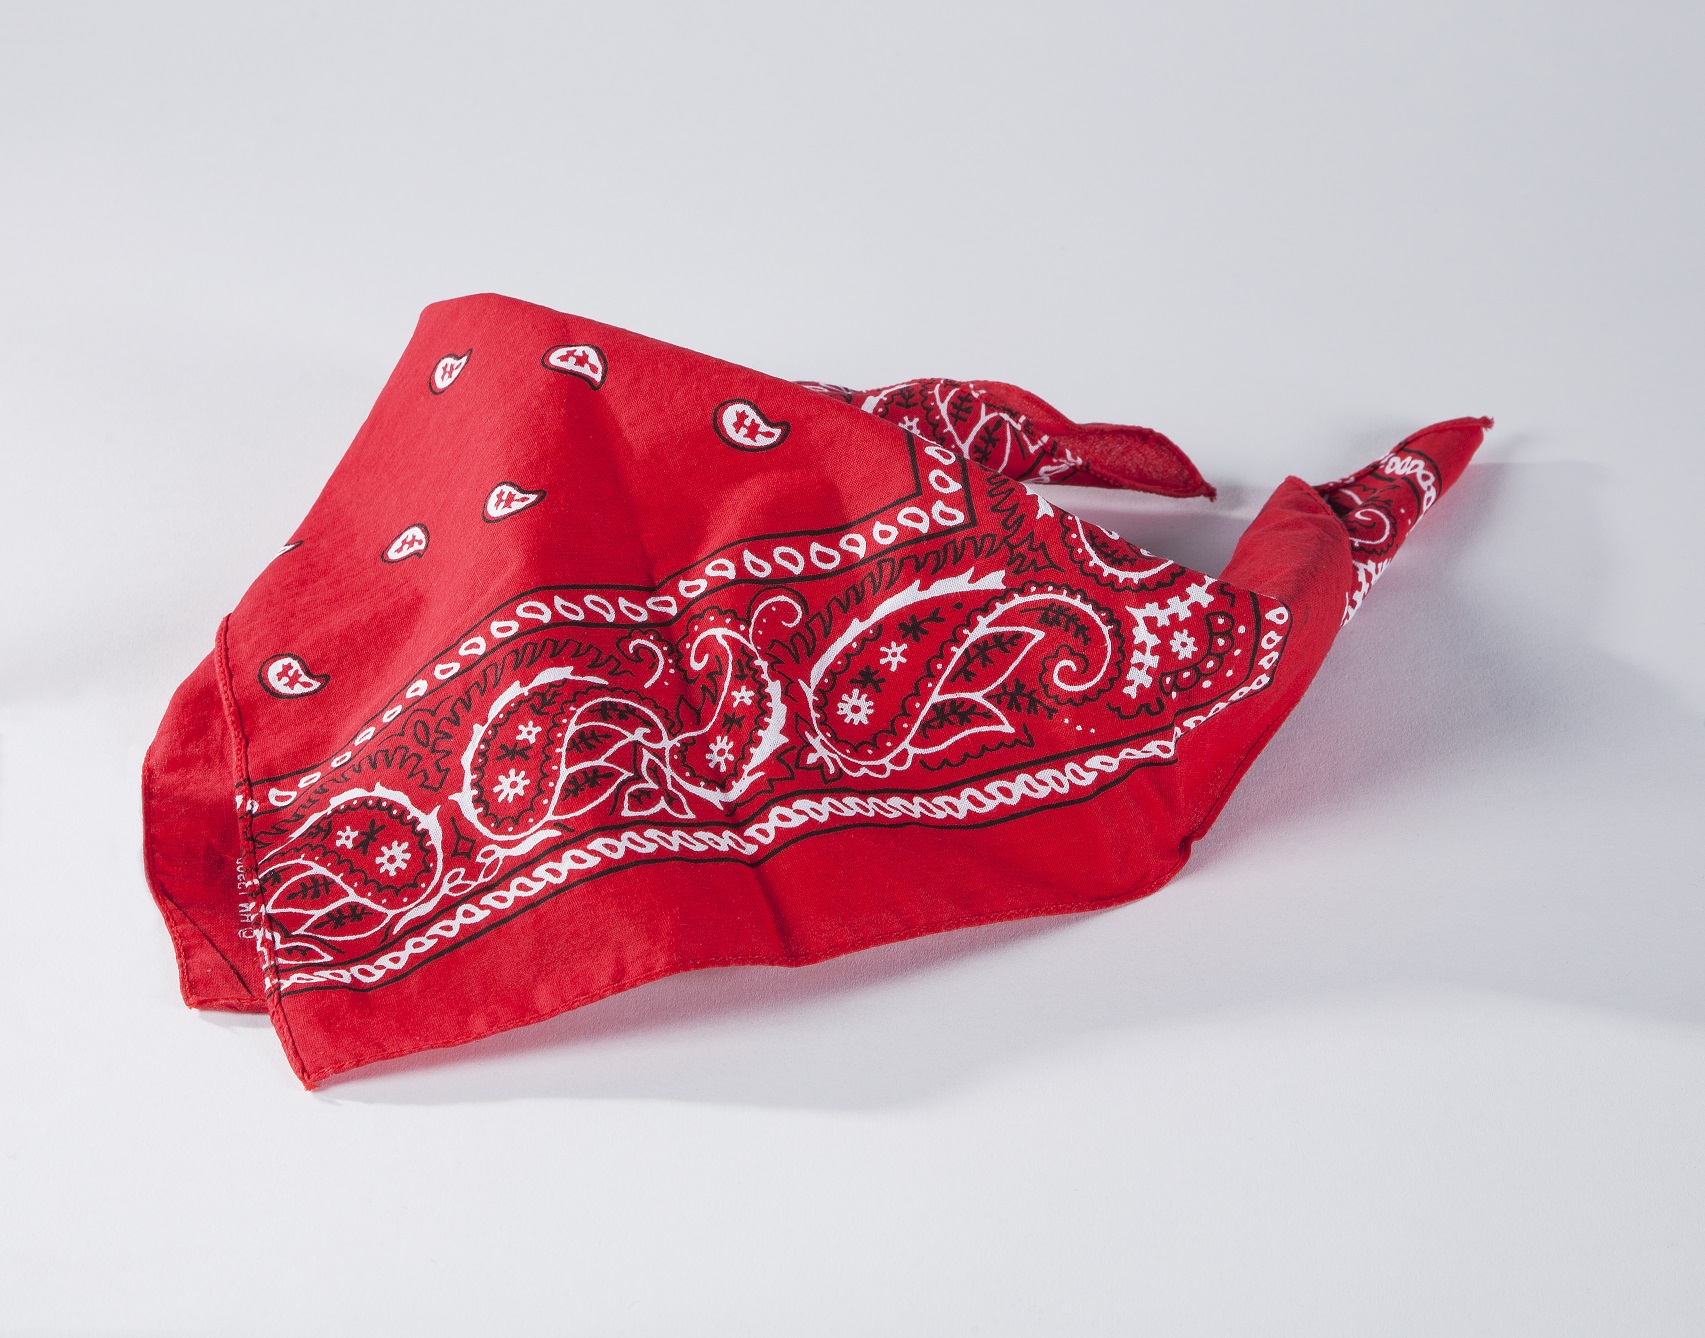 The red bandana belonging to 9/11 victim Welles Crowther is displayed on a white surface at the Museum.